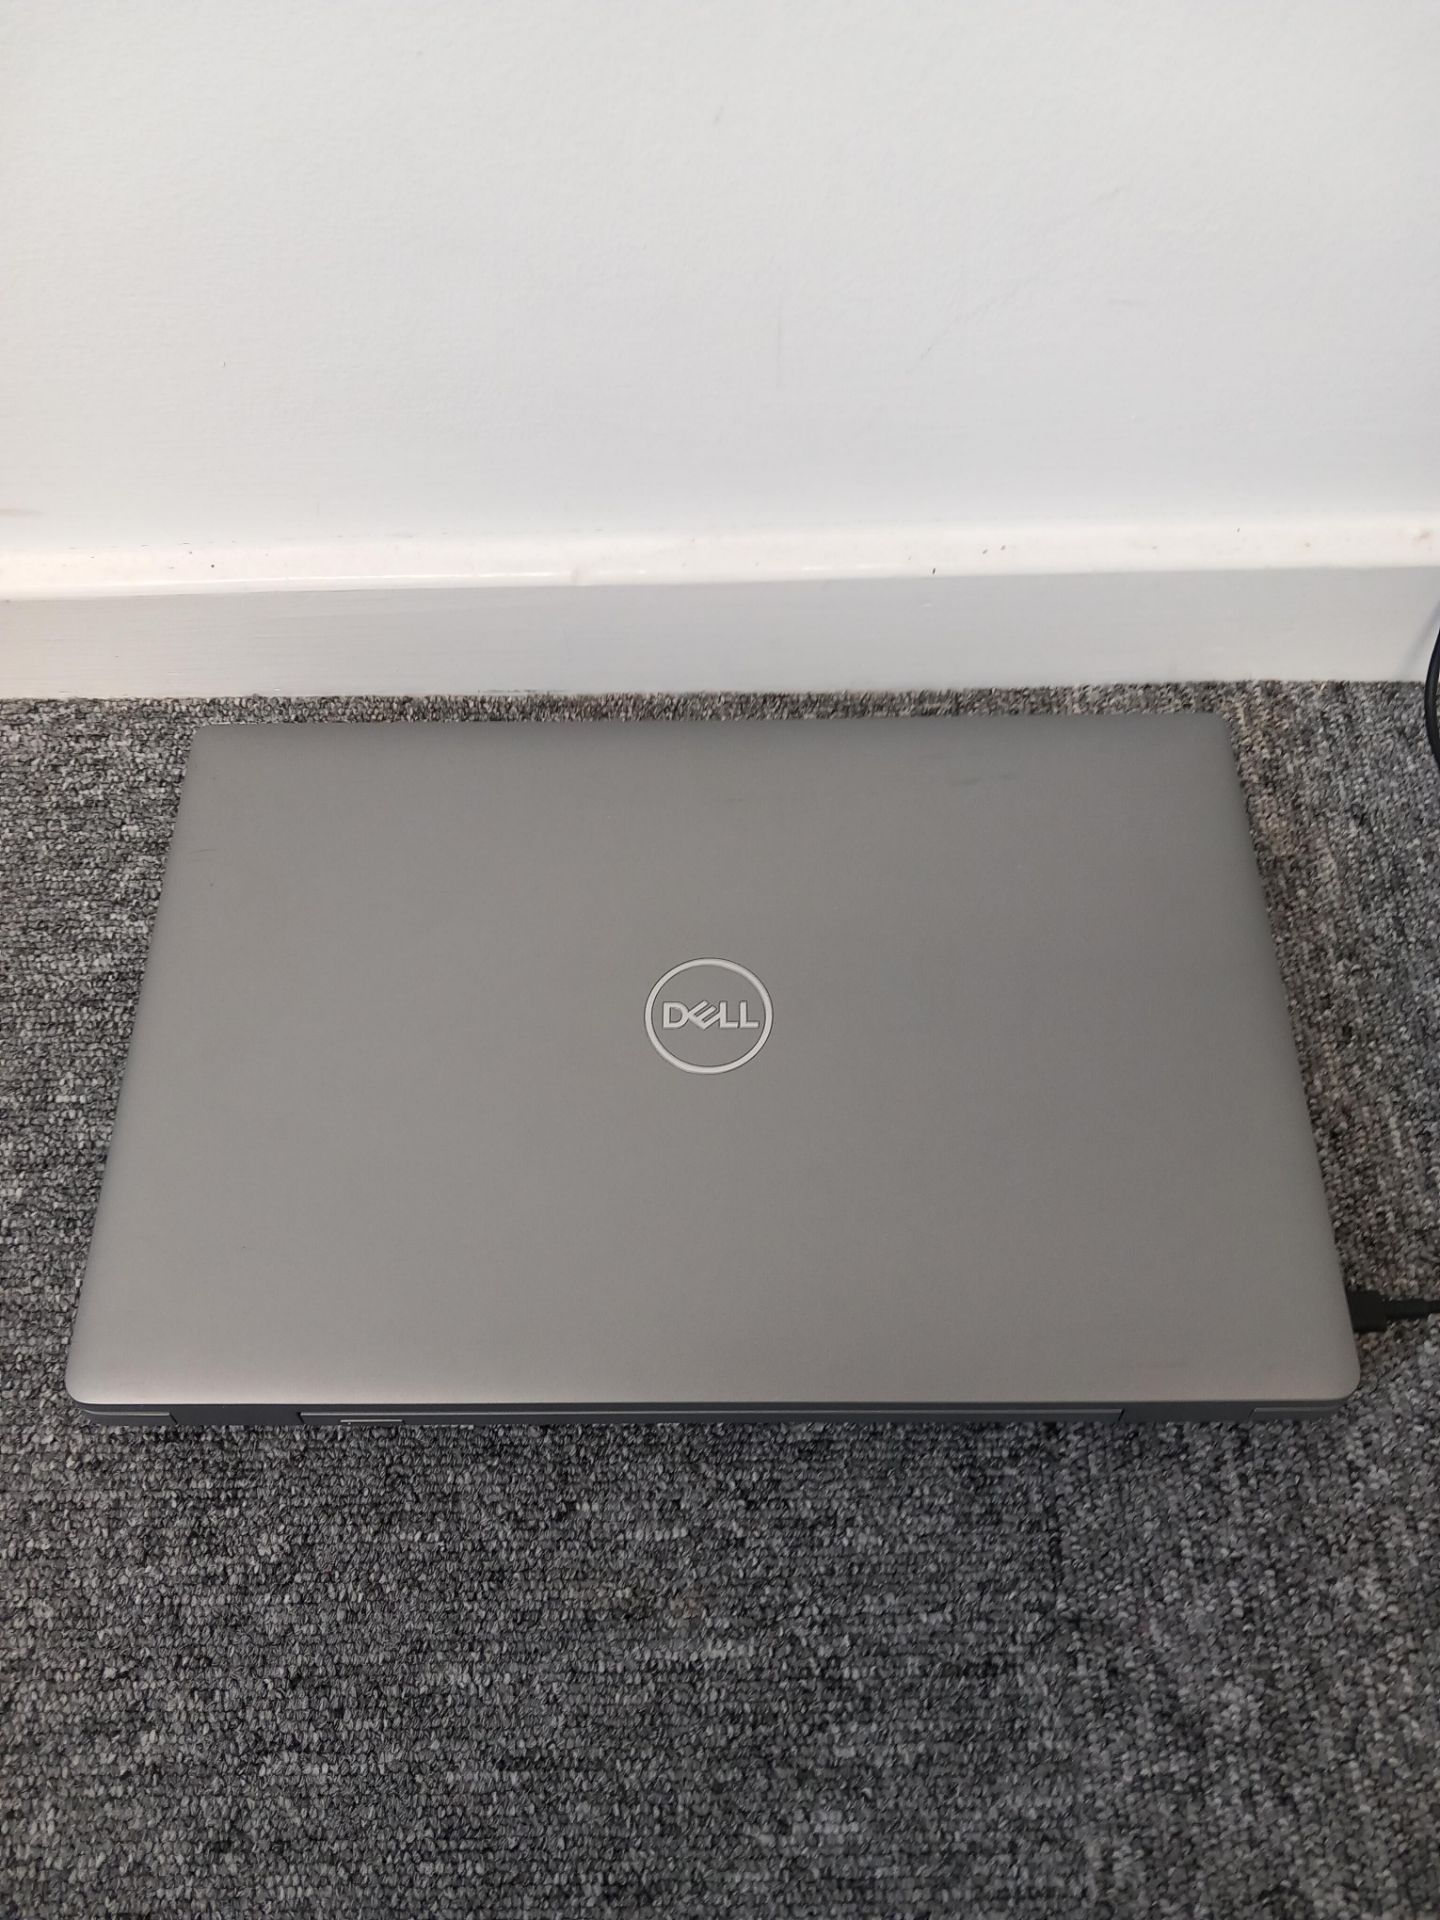 Dell Latitude 5520 Laptop no charger (Located in Stockport) - Image 2 of 6